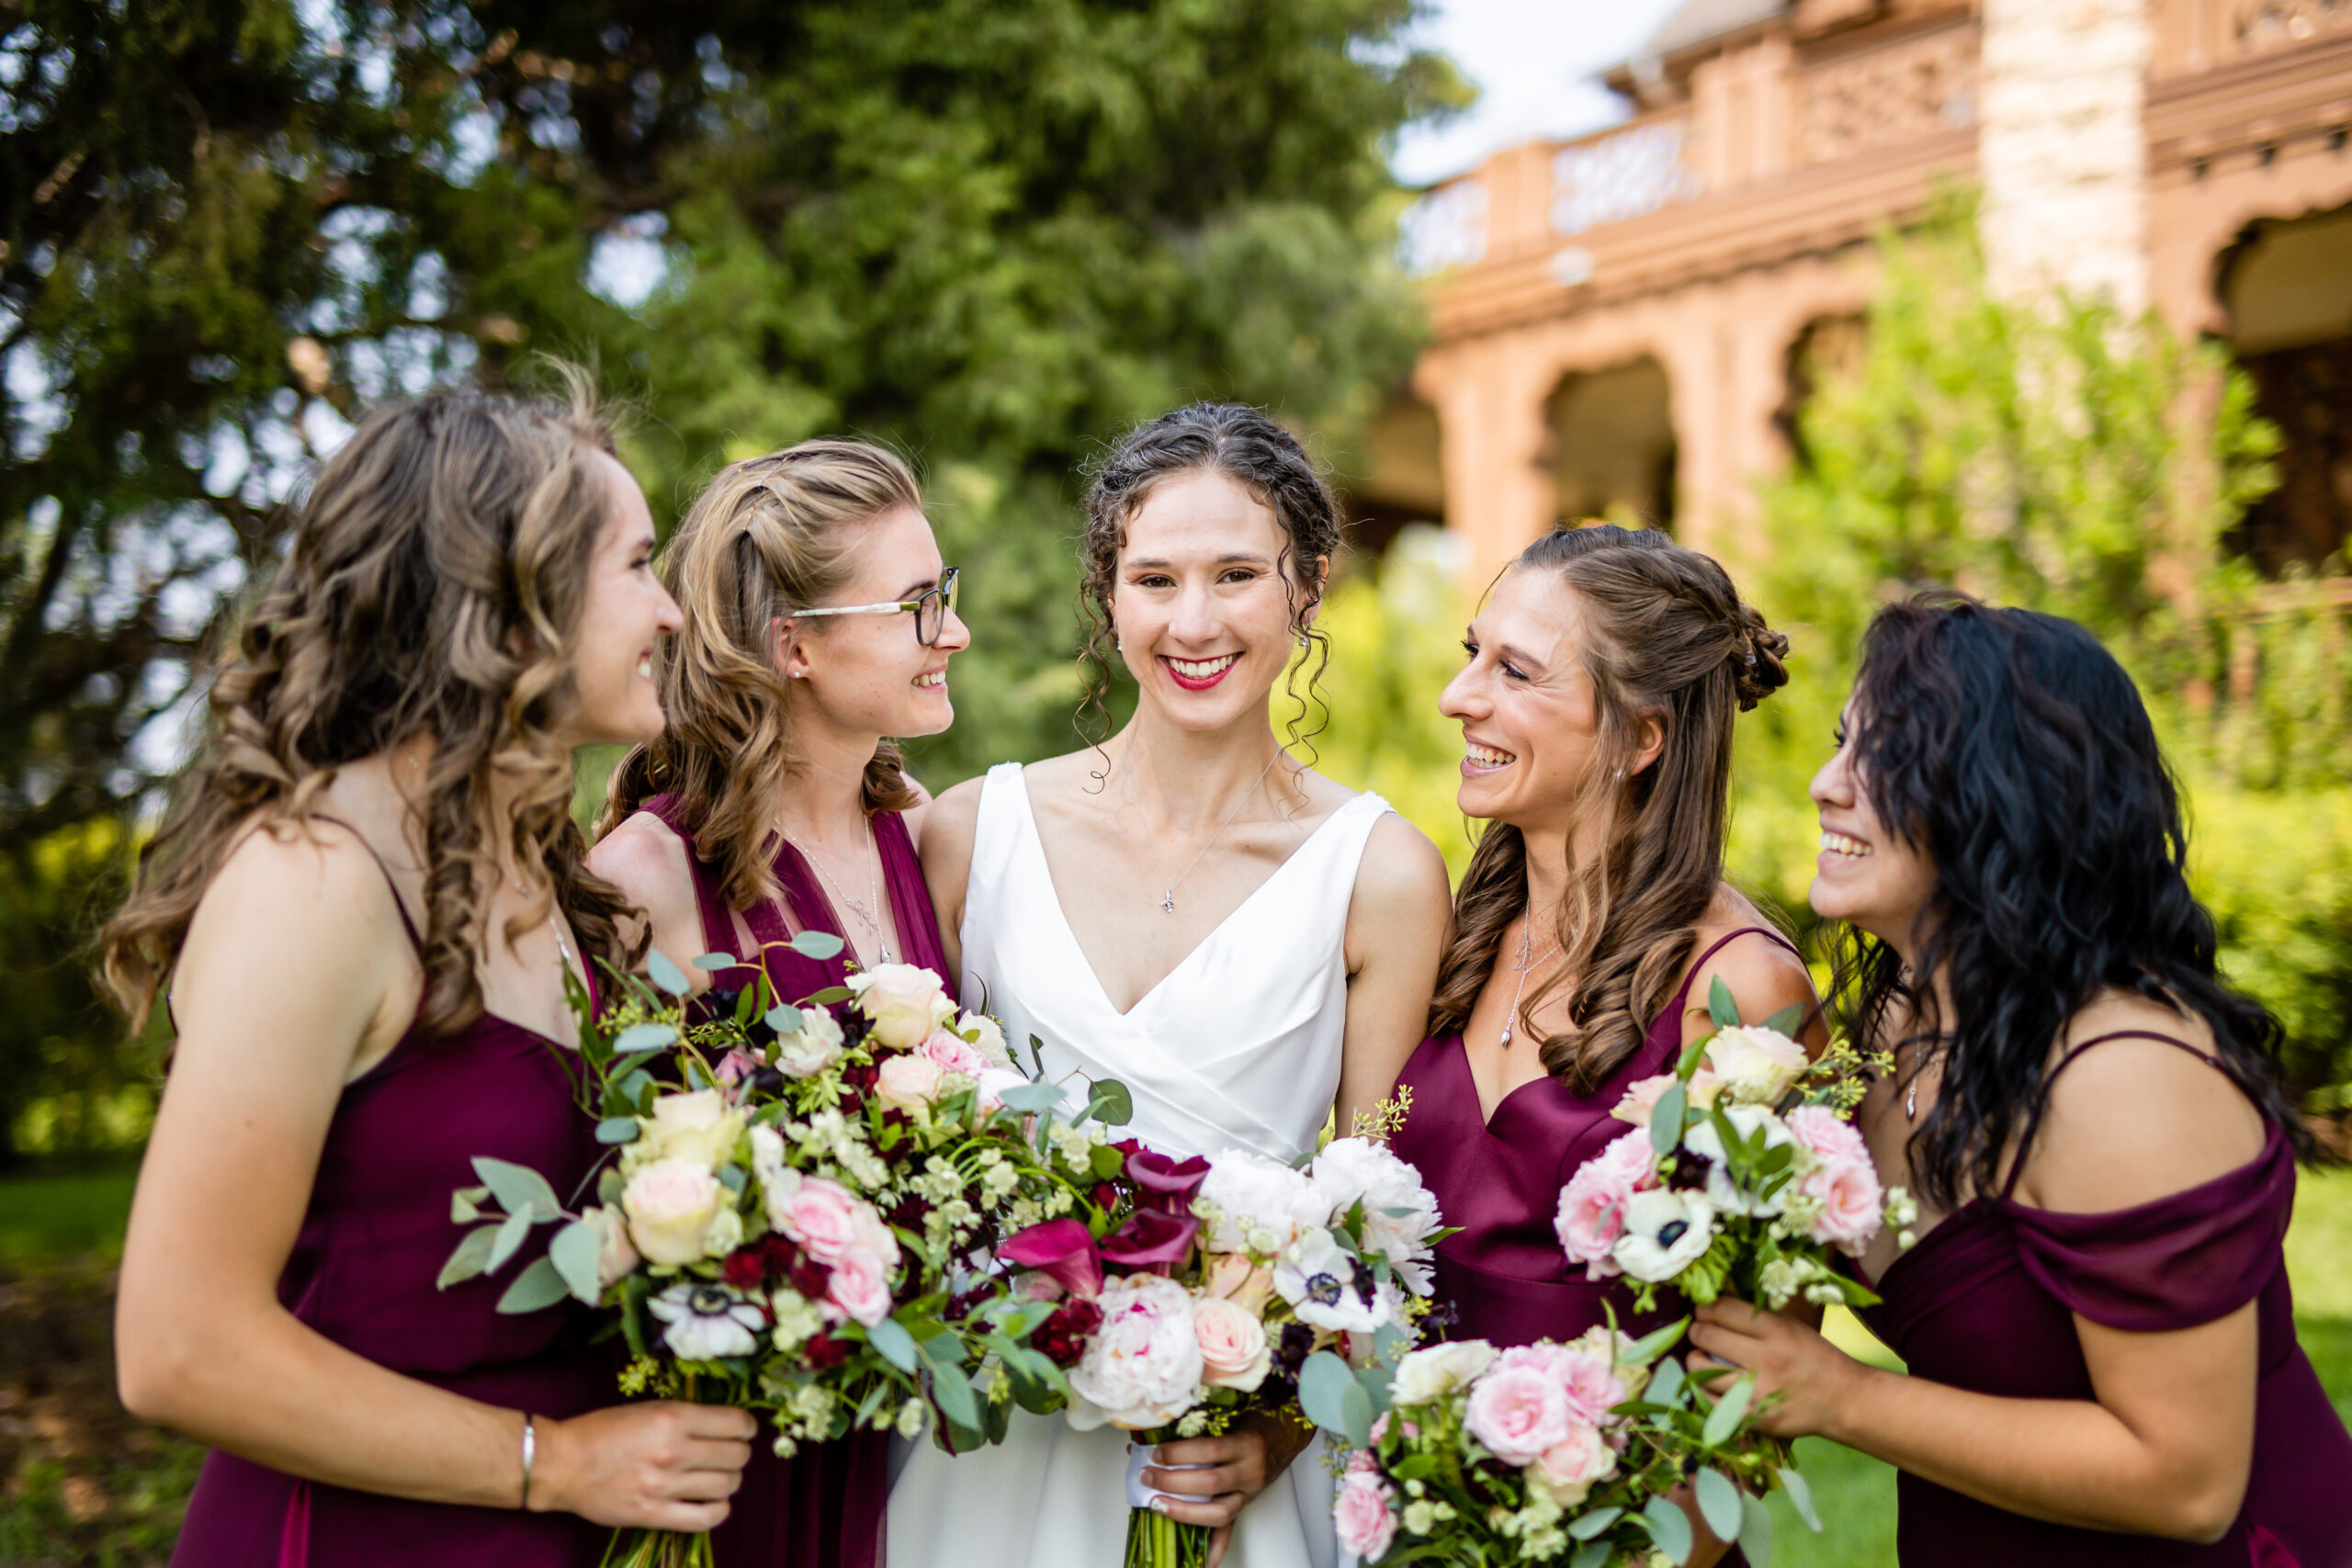 A bride poses with her bridesmaids in dark maroon dresses.